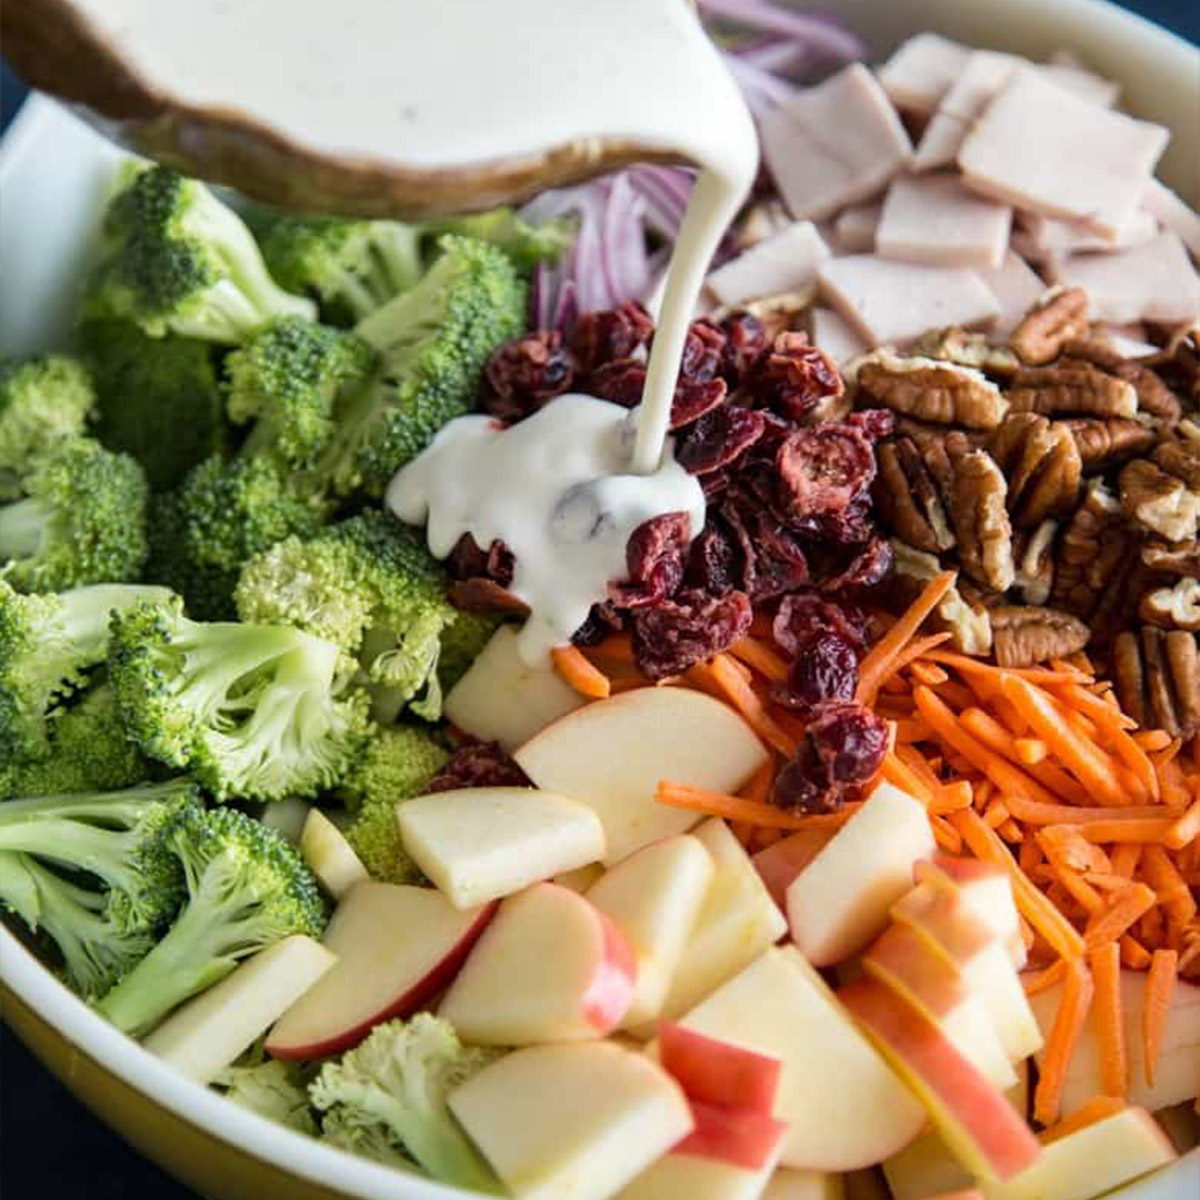 Pouring dressing over broccoli salad with apples